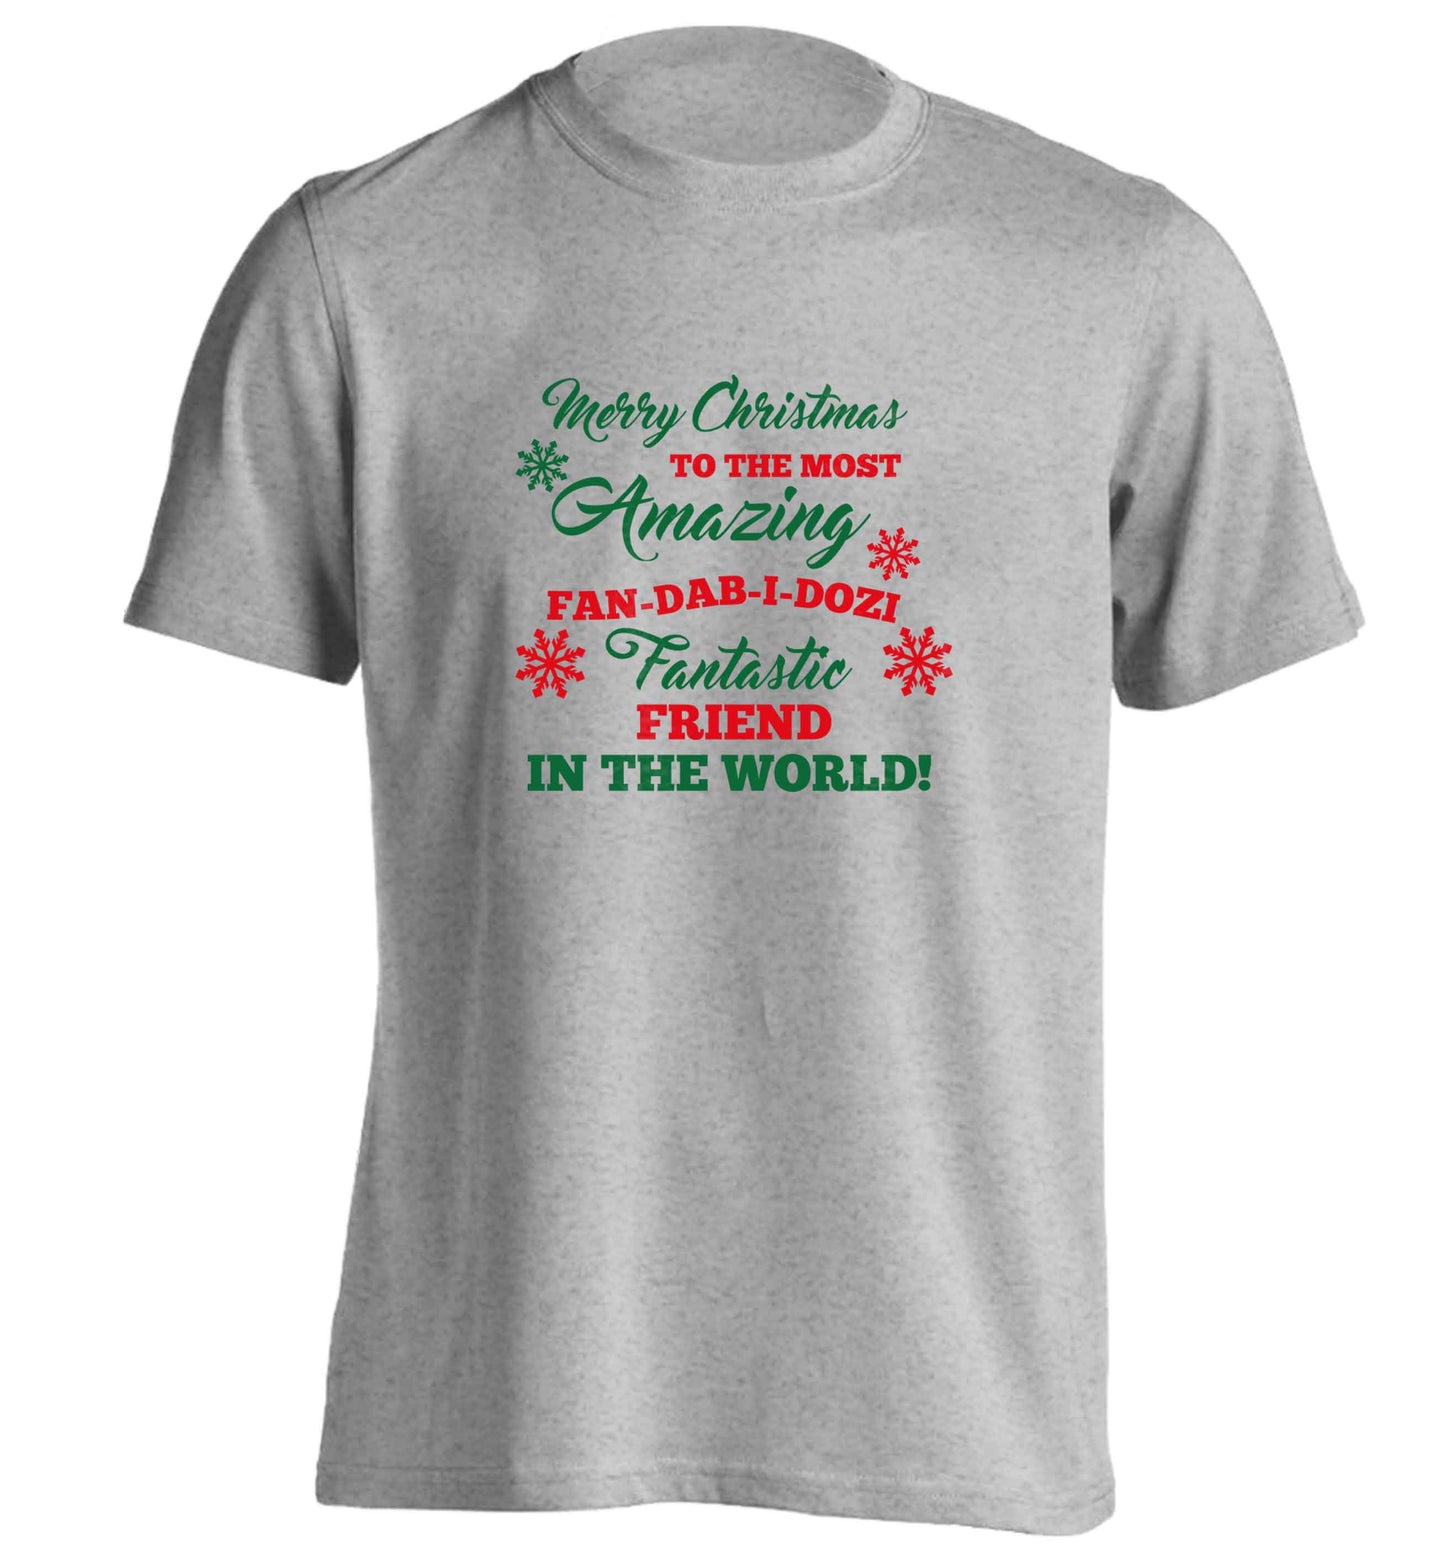 Merry Christmas to the most amazing fan-dab-i-dozi fantasic friend in the world adults unisex grey Tshirt 2XL